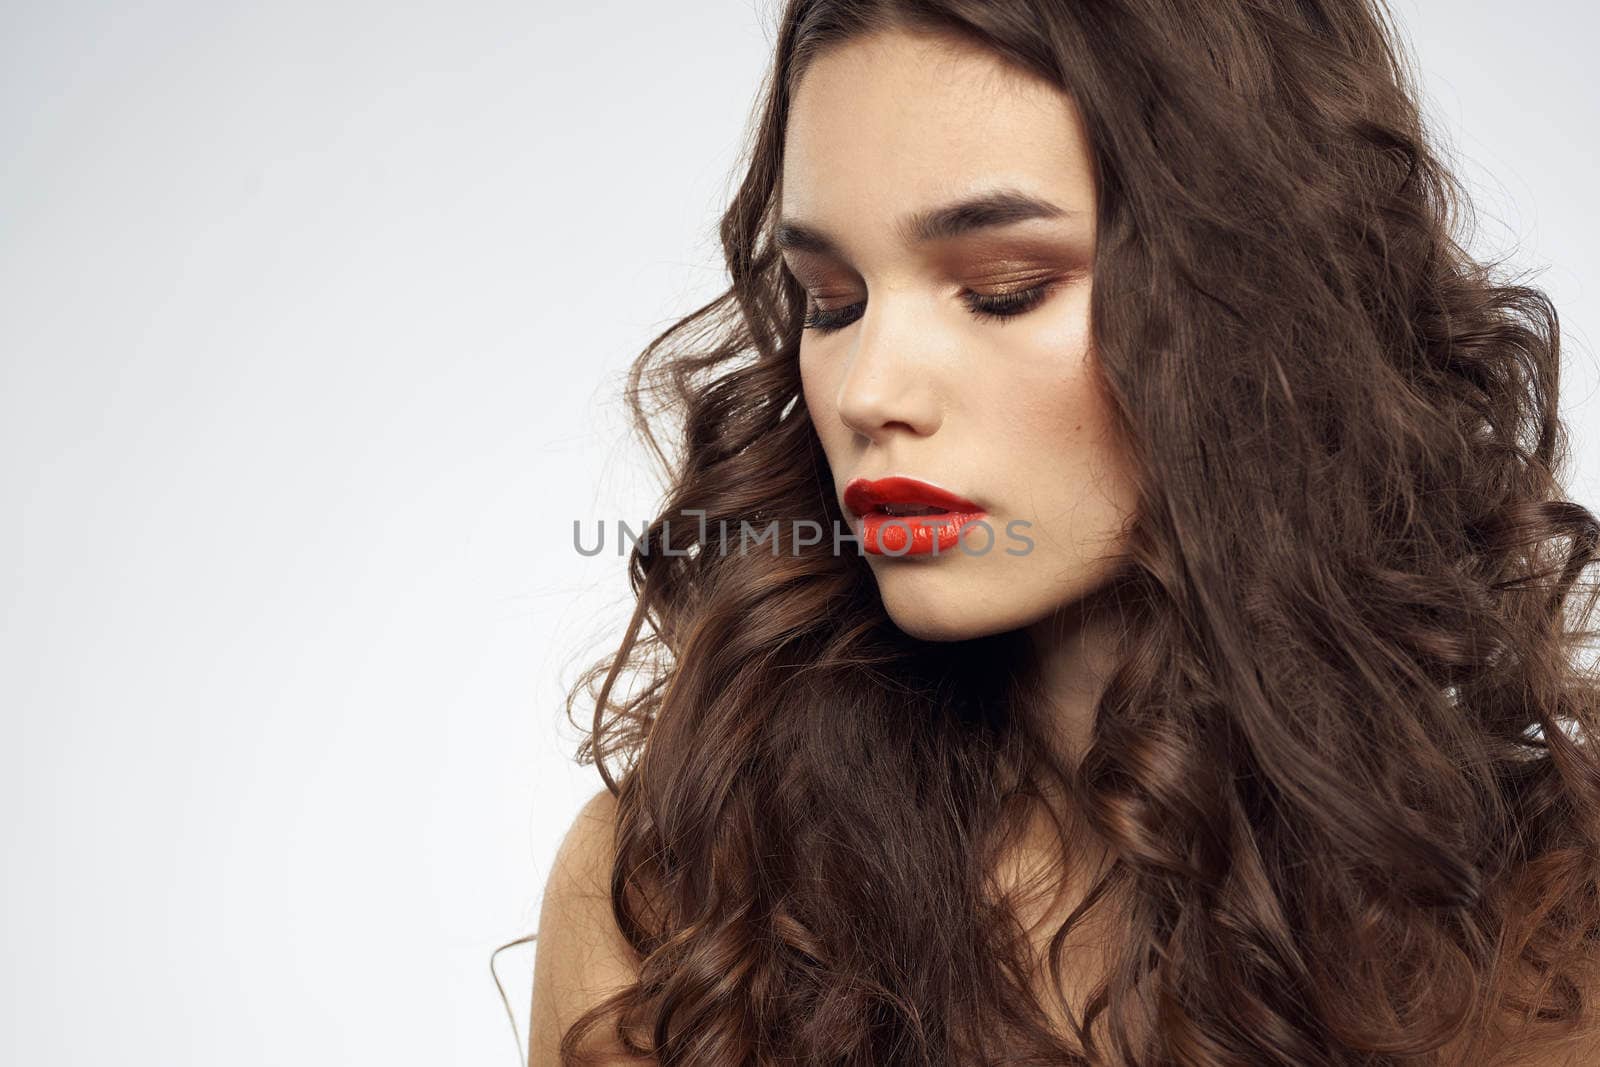 woman with bare shoulders wavy hairstyle glamor makeup light background by SHOTPRIME